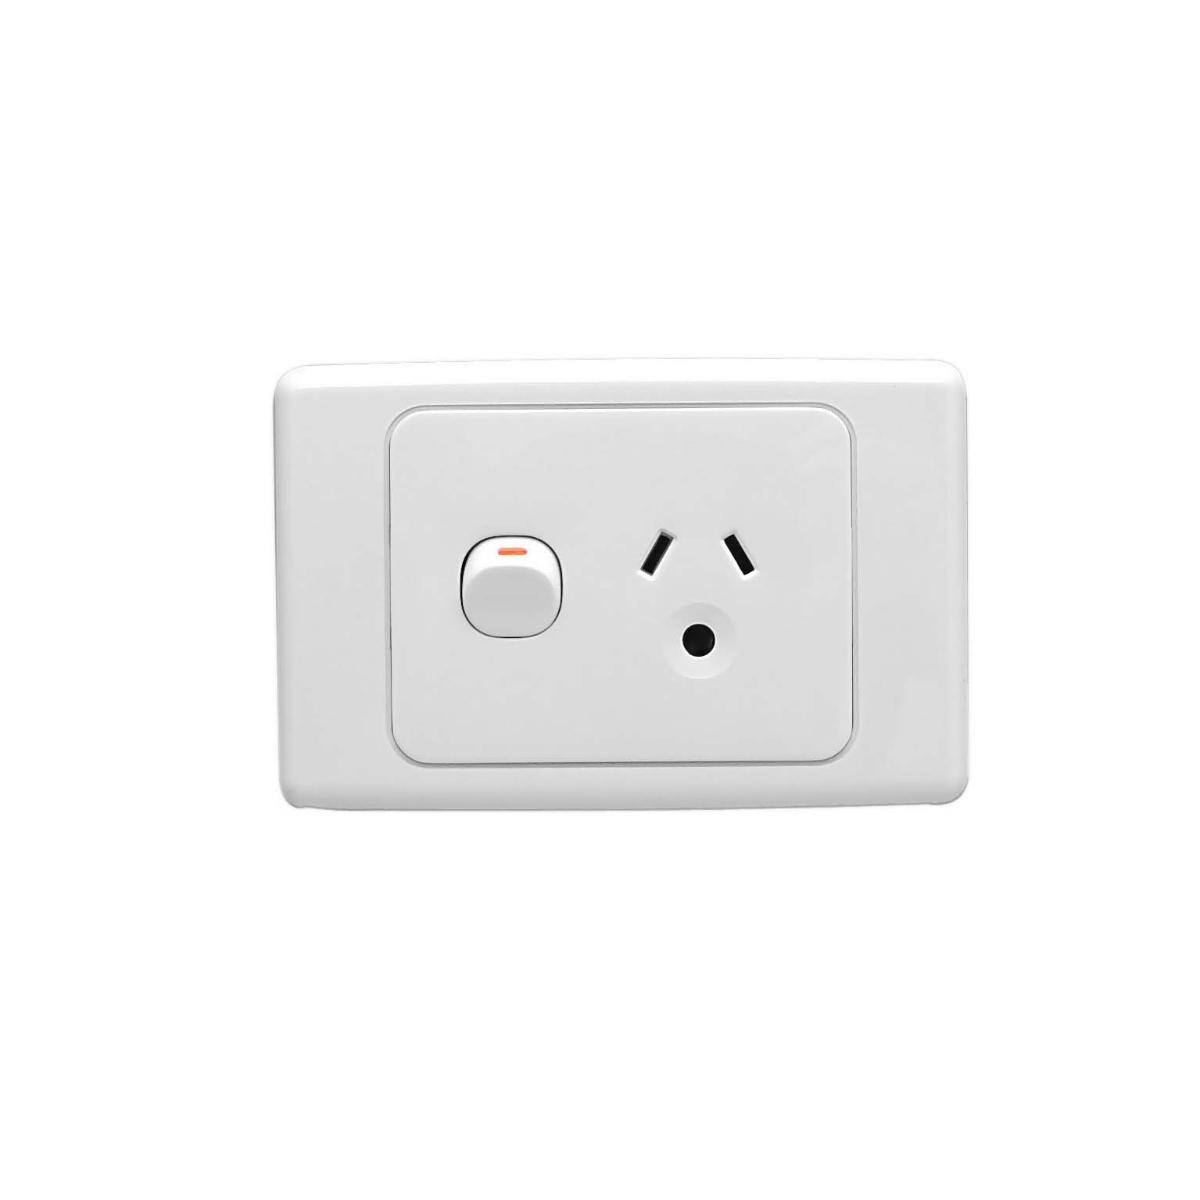 GPO SOCKET SWT SGL 10A ROUND EARTH WHITE